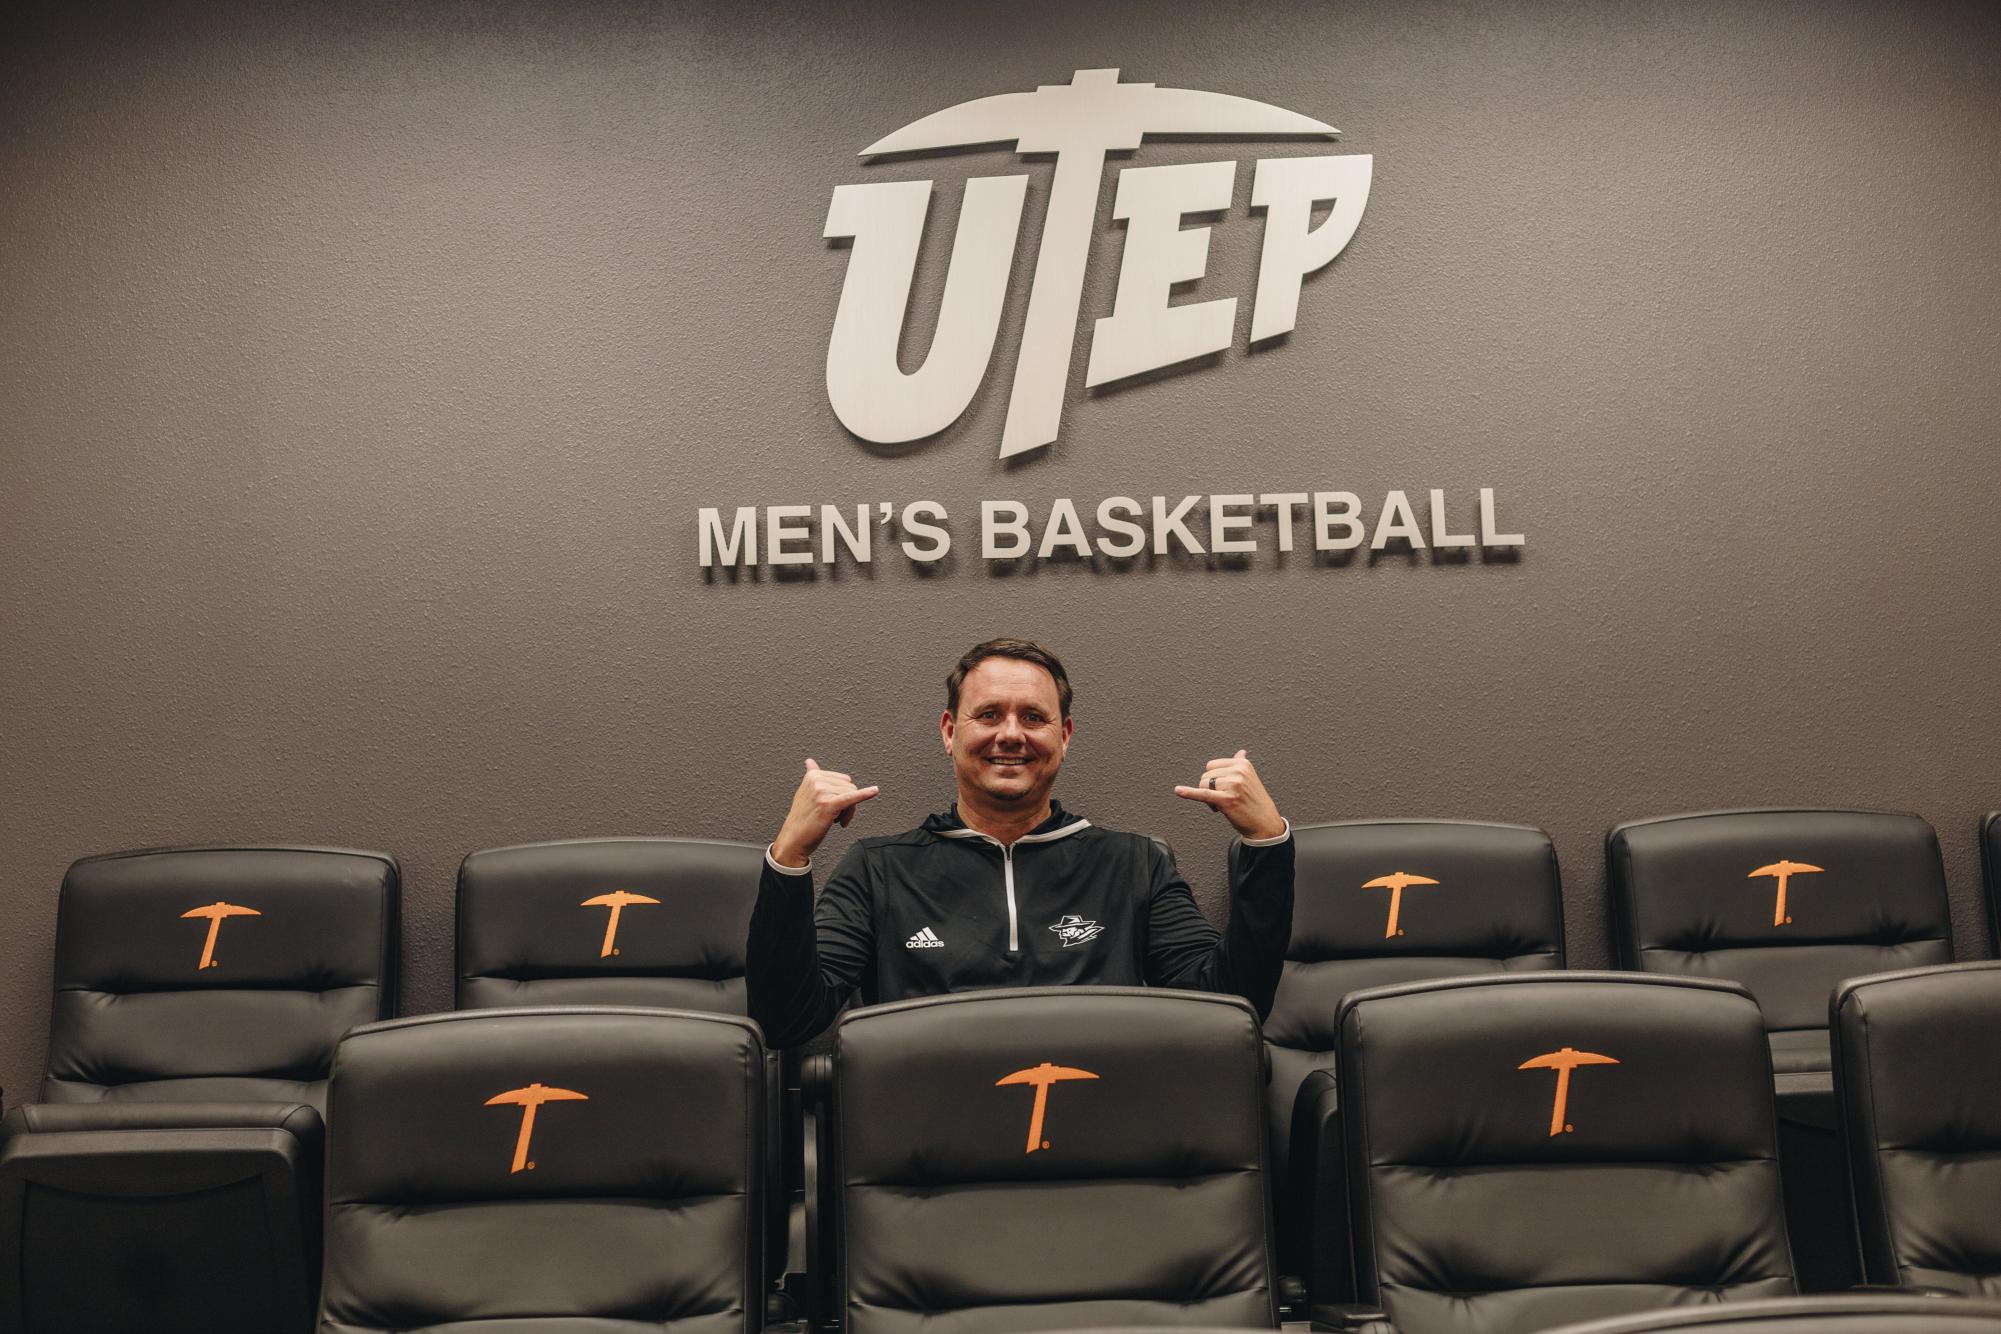 UTEP men’s basketball head coach Joe Golding is making sure the team is ready for a comeback after last year’s 14-18 record.  